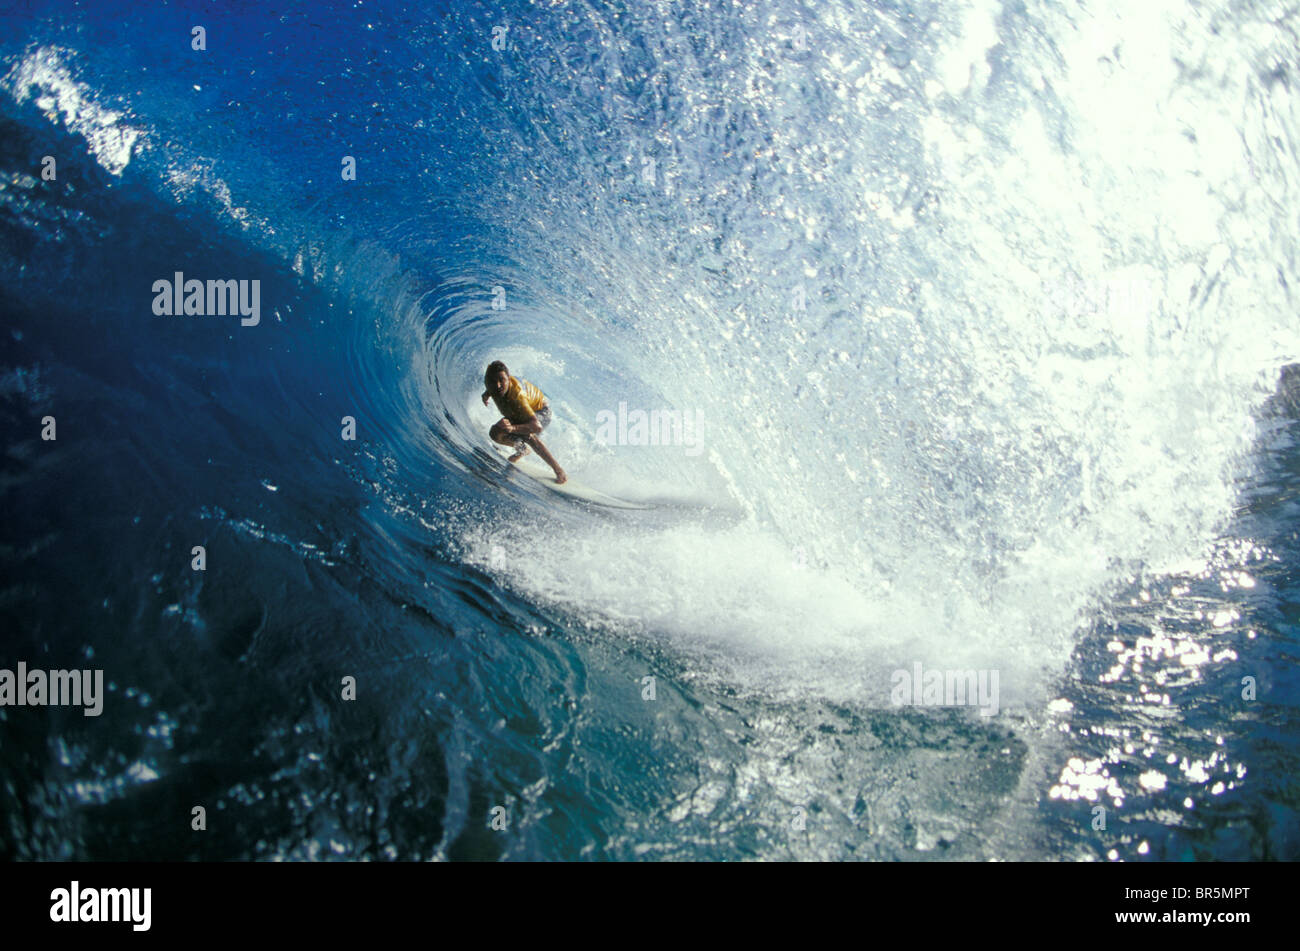 Surfer deep in the tube at Off The Wall on Oahu's north shore. Stock Photo